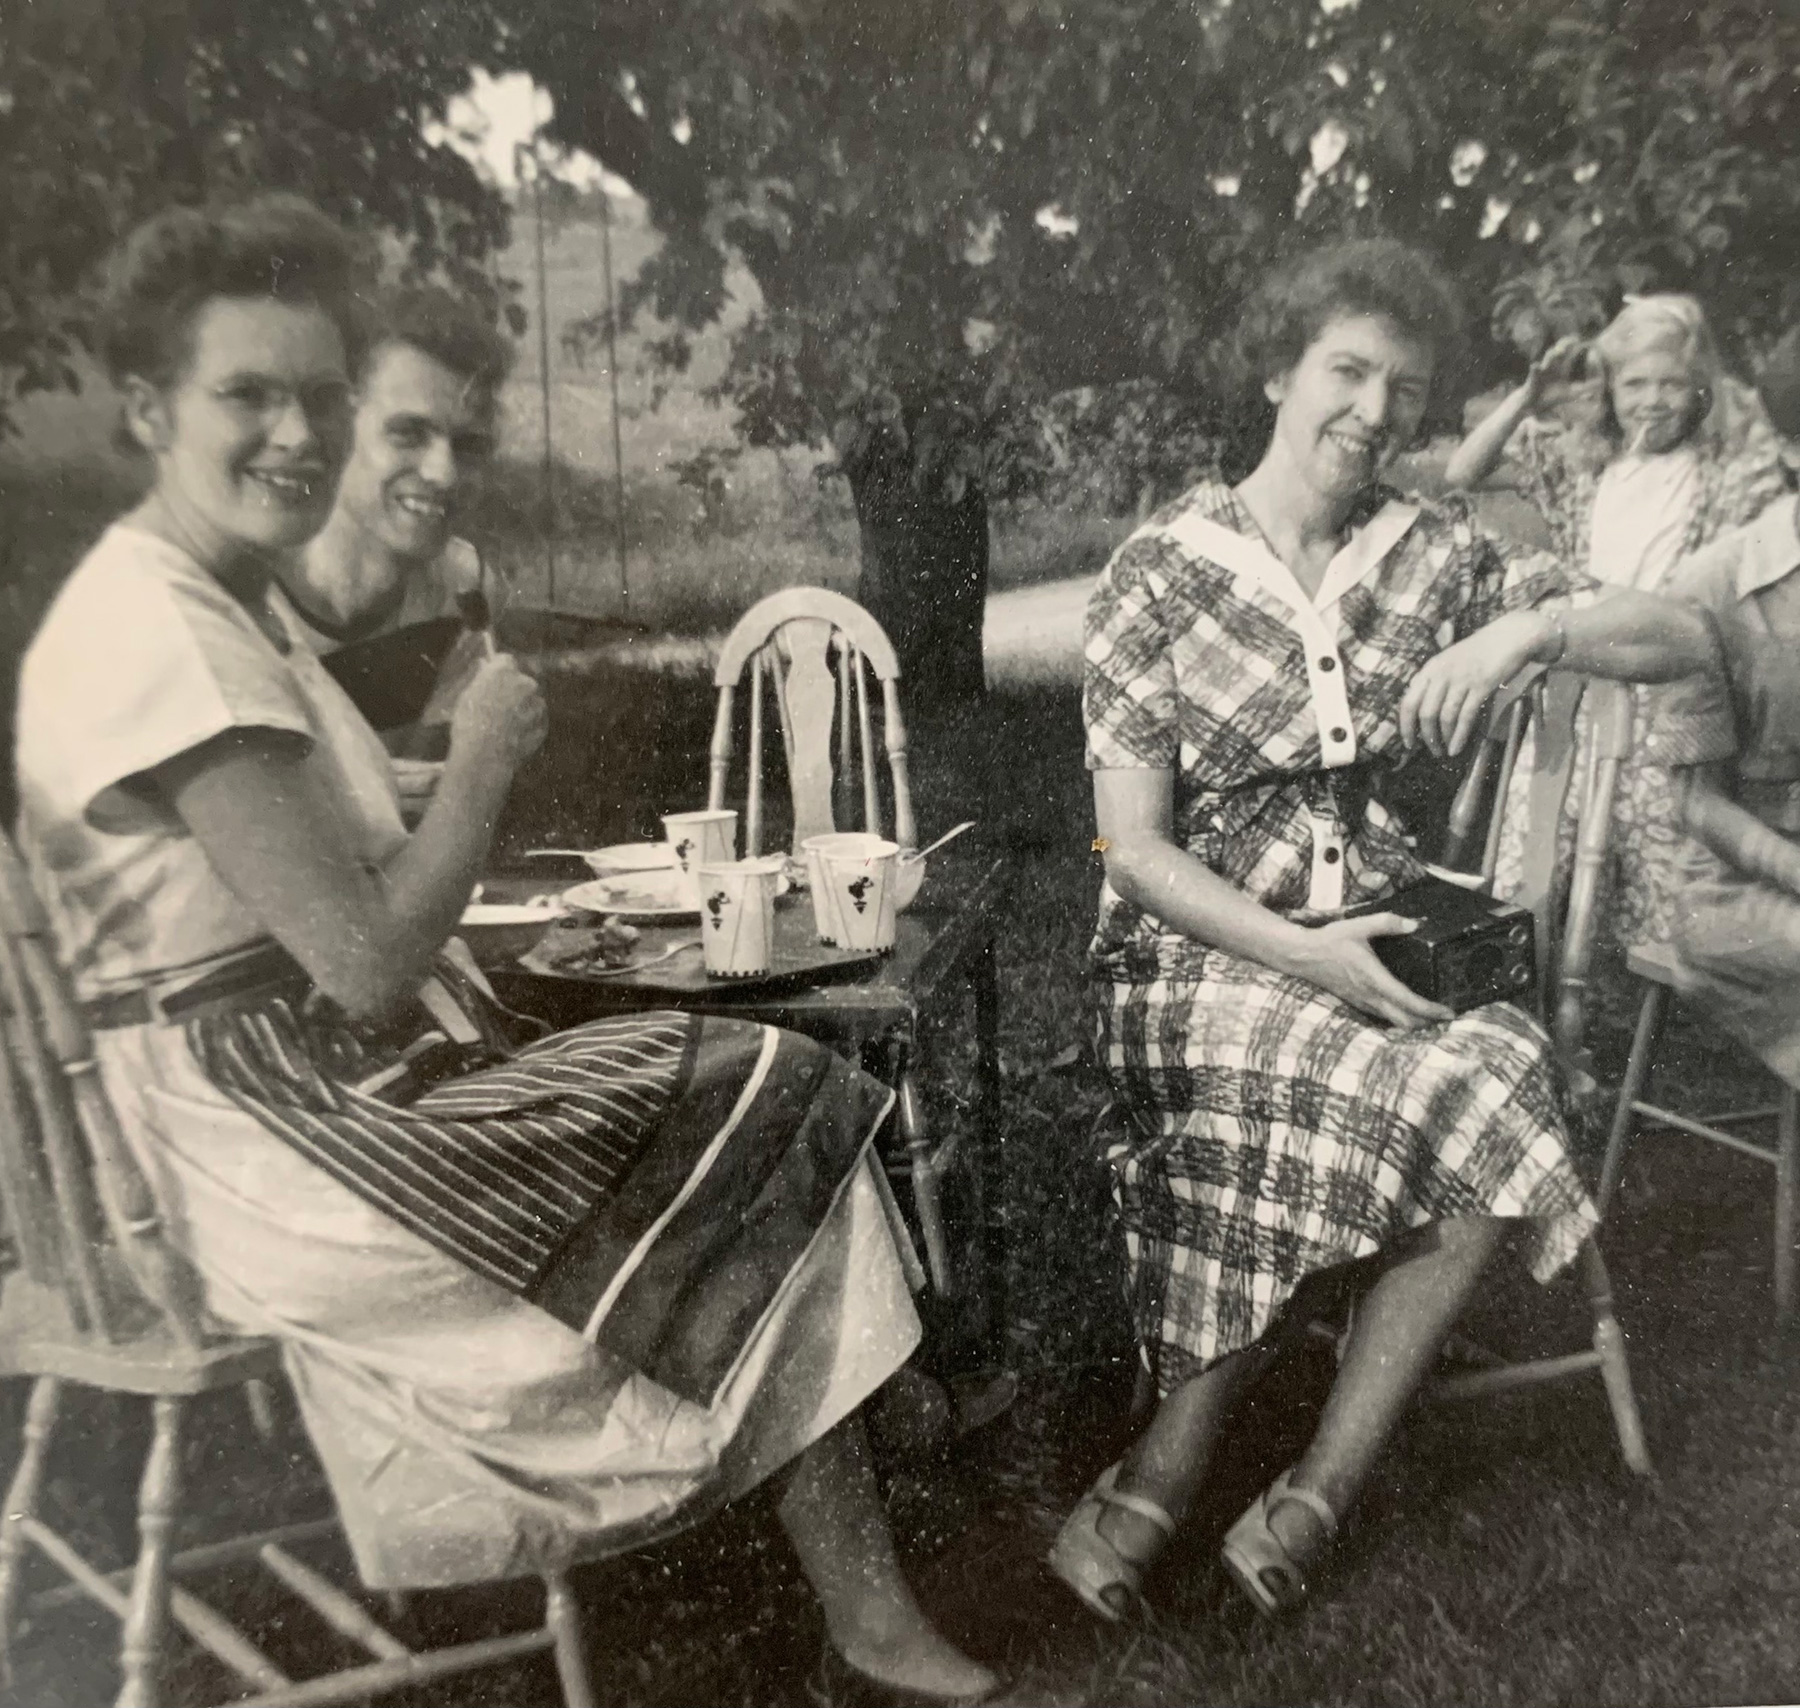 Black and white archive photograph of women sitting at tables outside including Marjorie Ortlip Stockin.